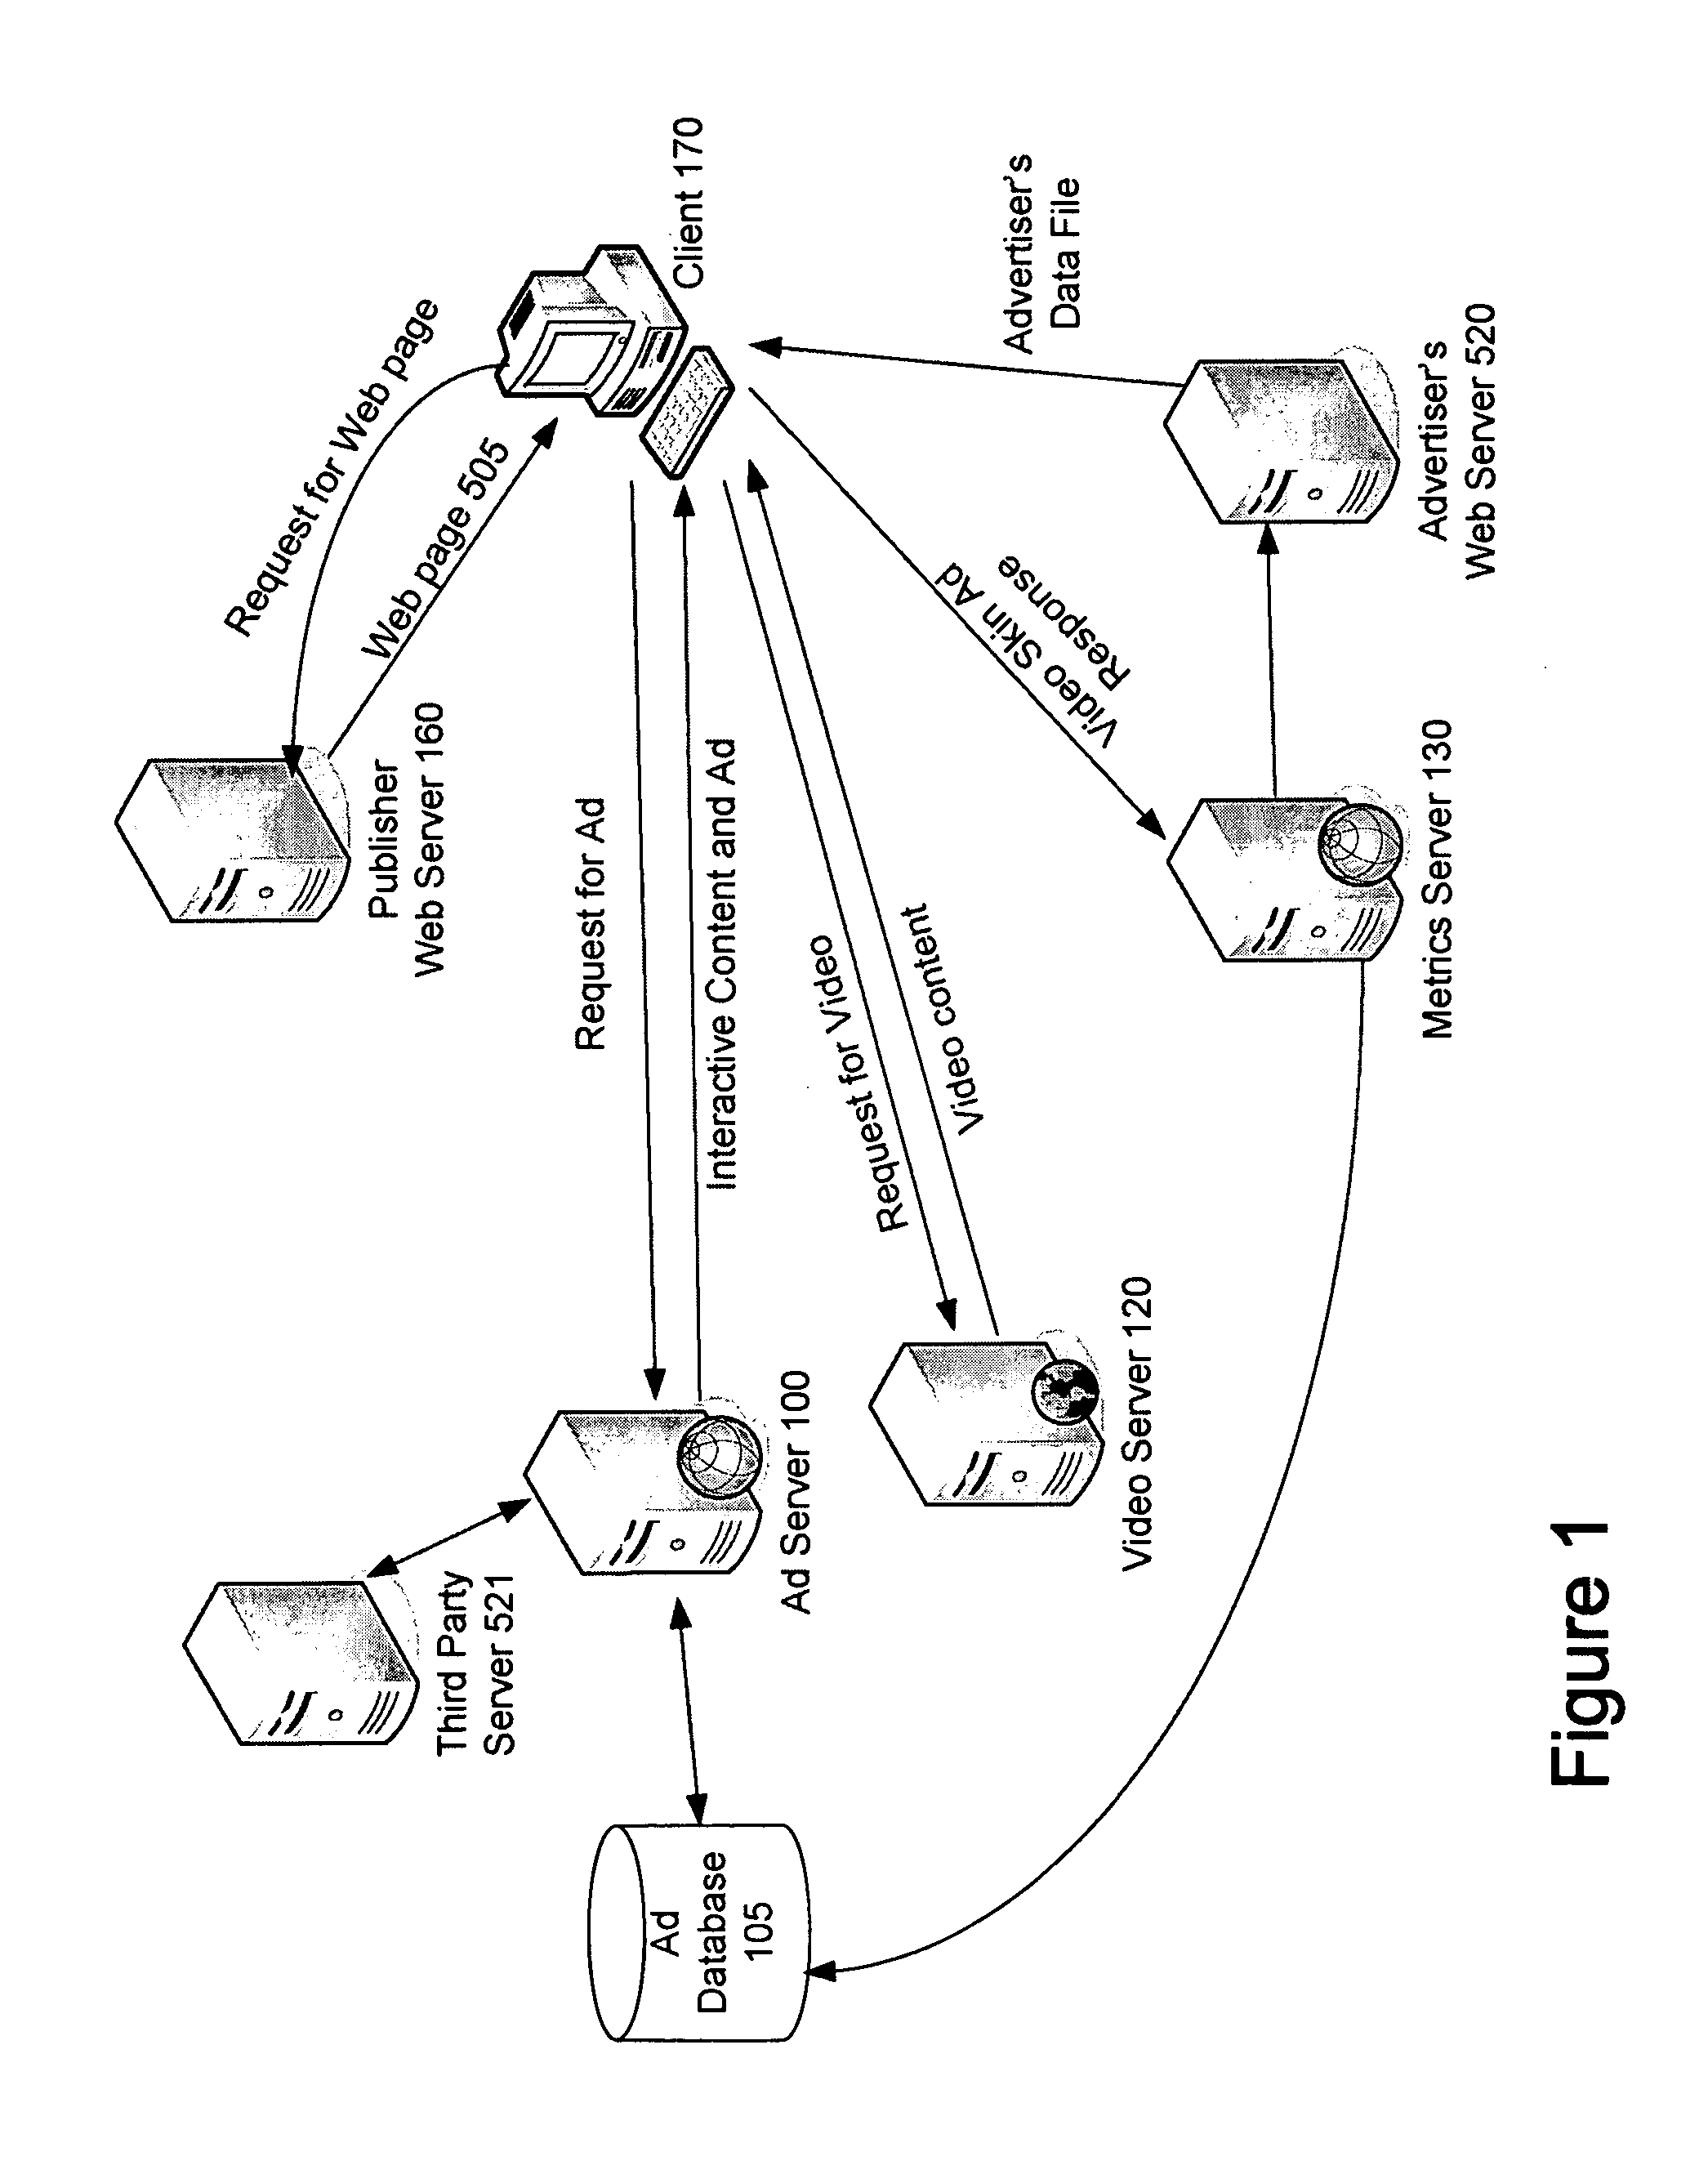 System and Method for Providing Sequential Video and Interactive Content